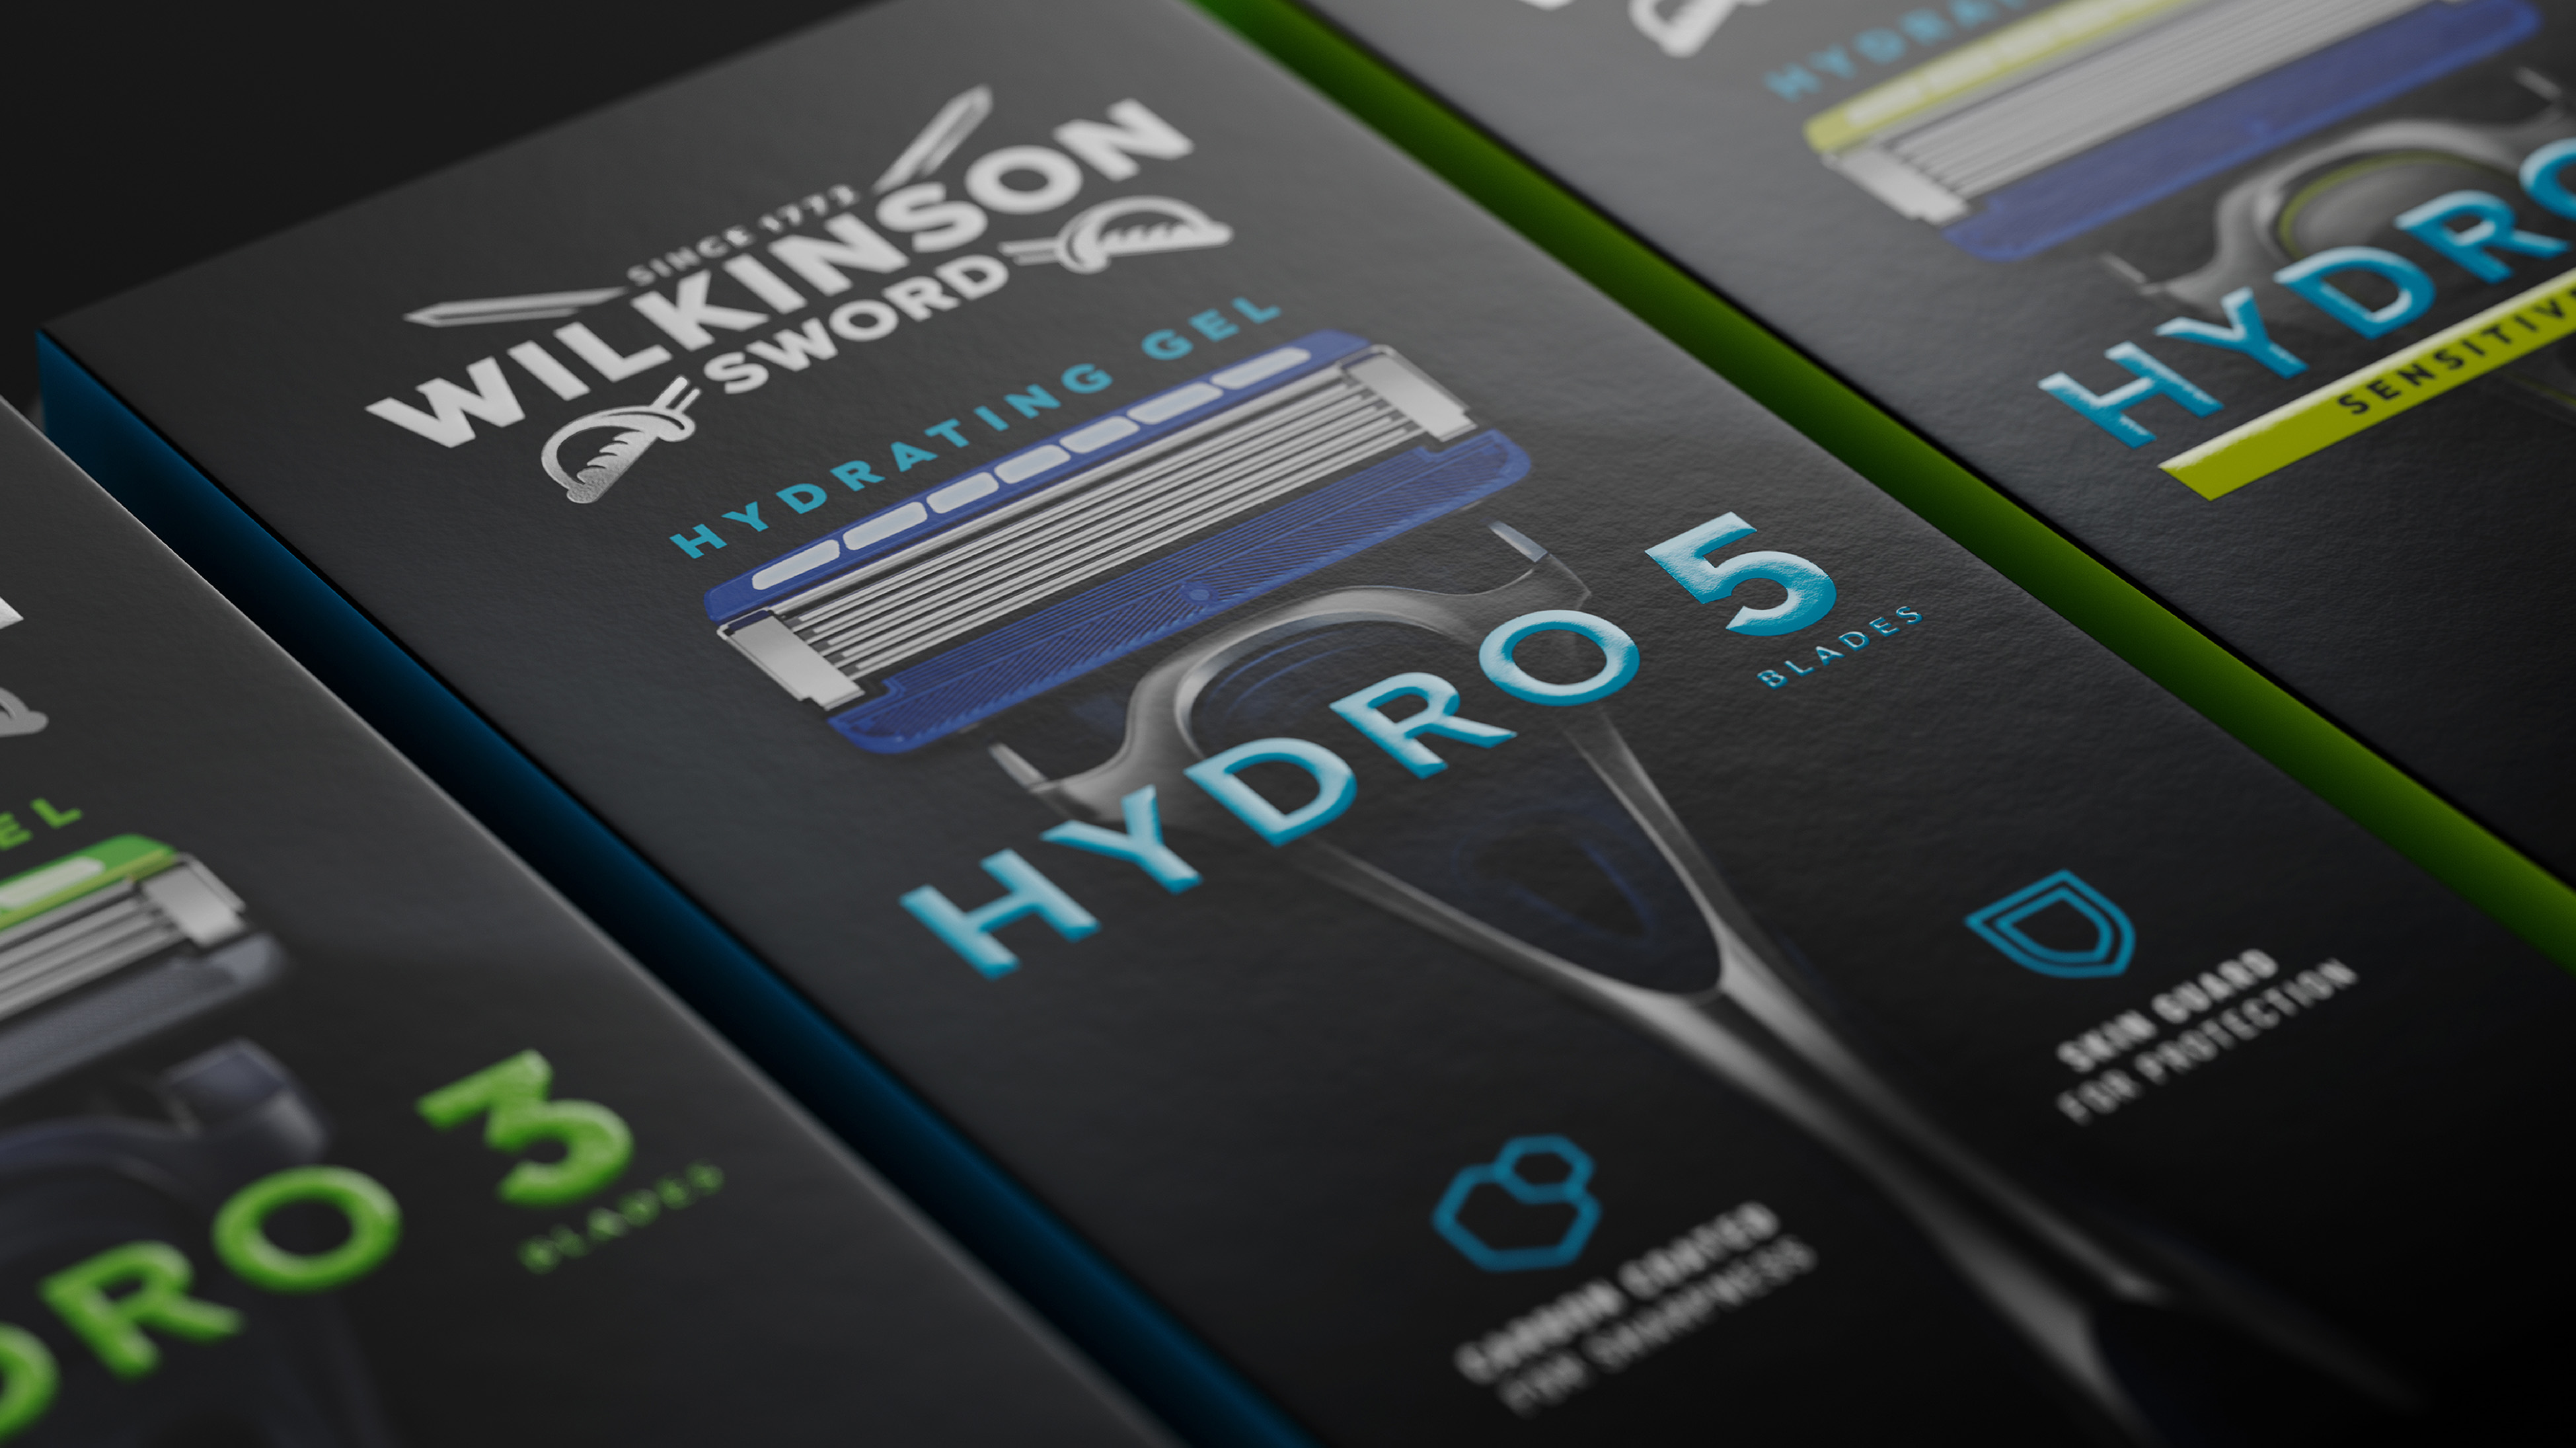 B&B Studio Partners with Wilkinson Sword to Rebrand and Restructure its Shaving Portfolio